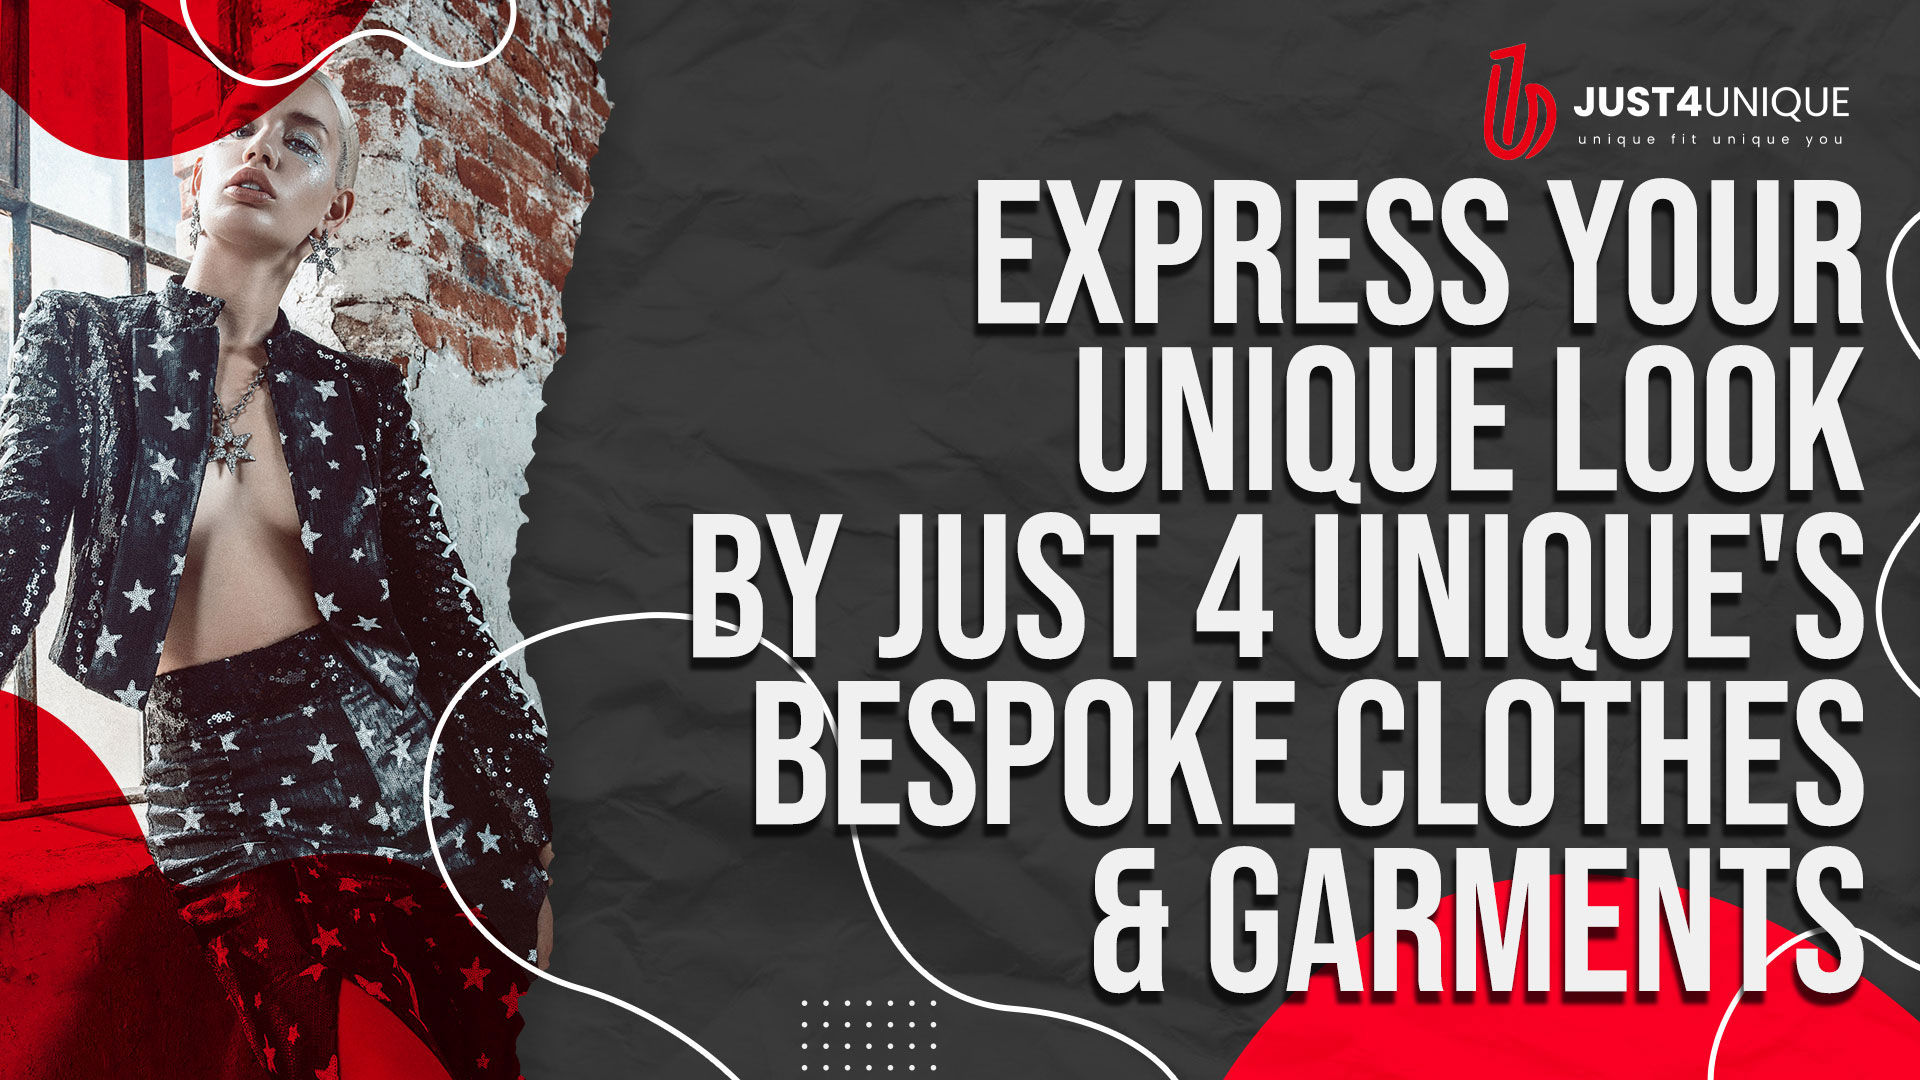 Express Your Unique Look By Just 4 Unique Bespoke